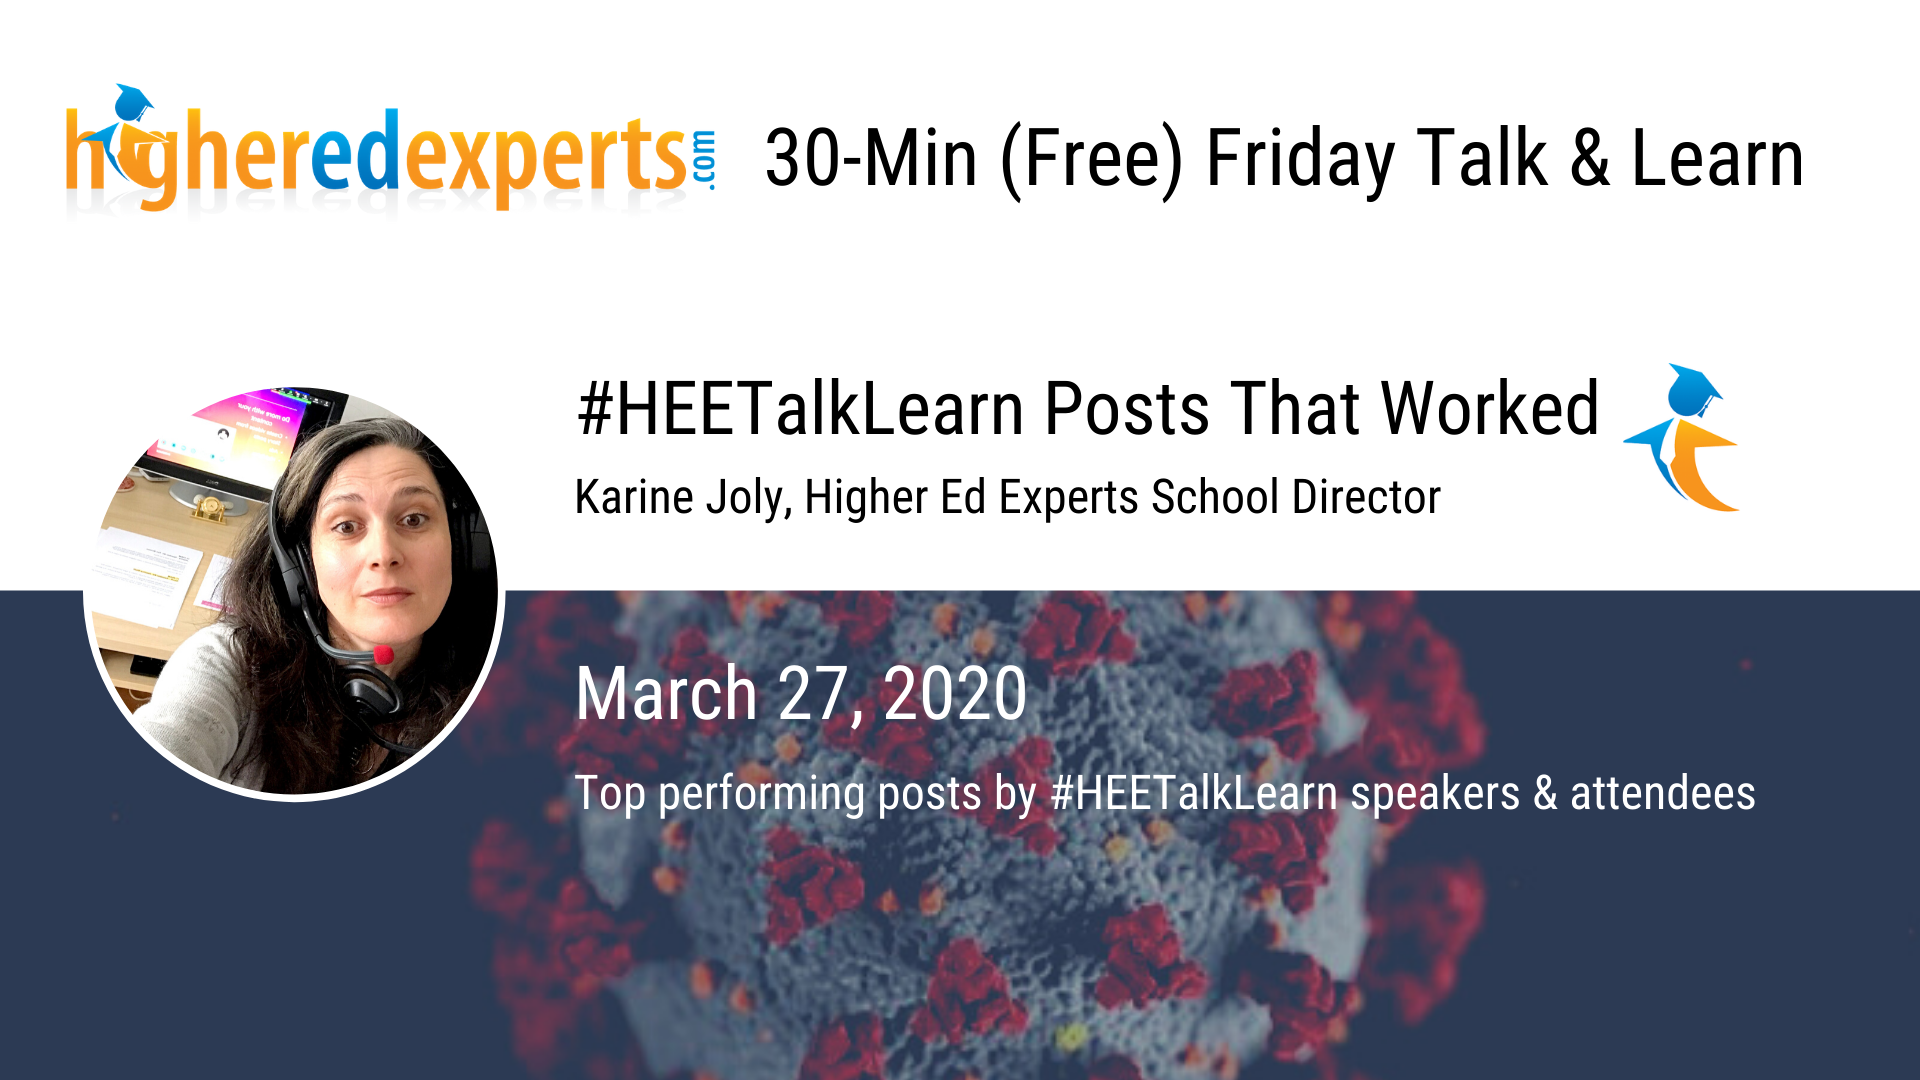 #HEETalkLearn Posts that Worked (March 27, 2020)